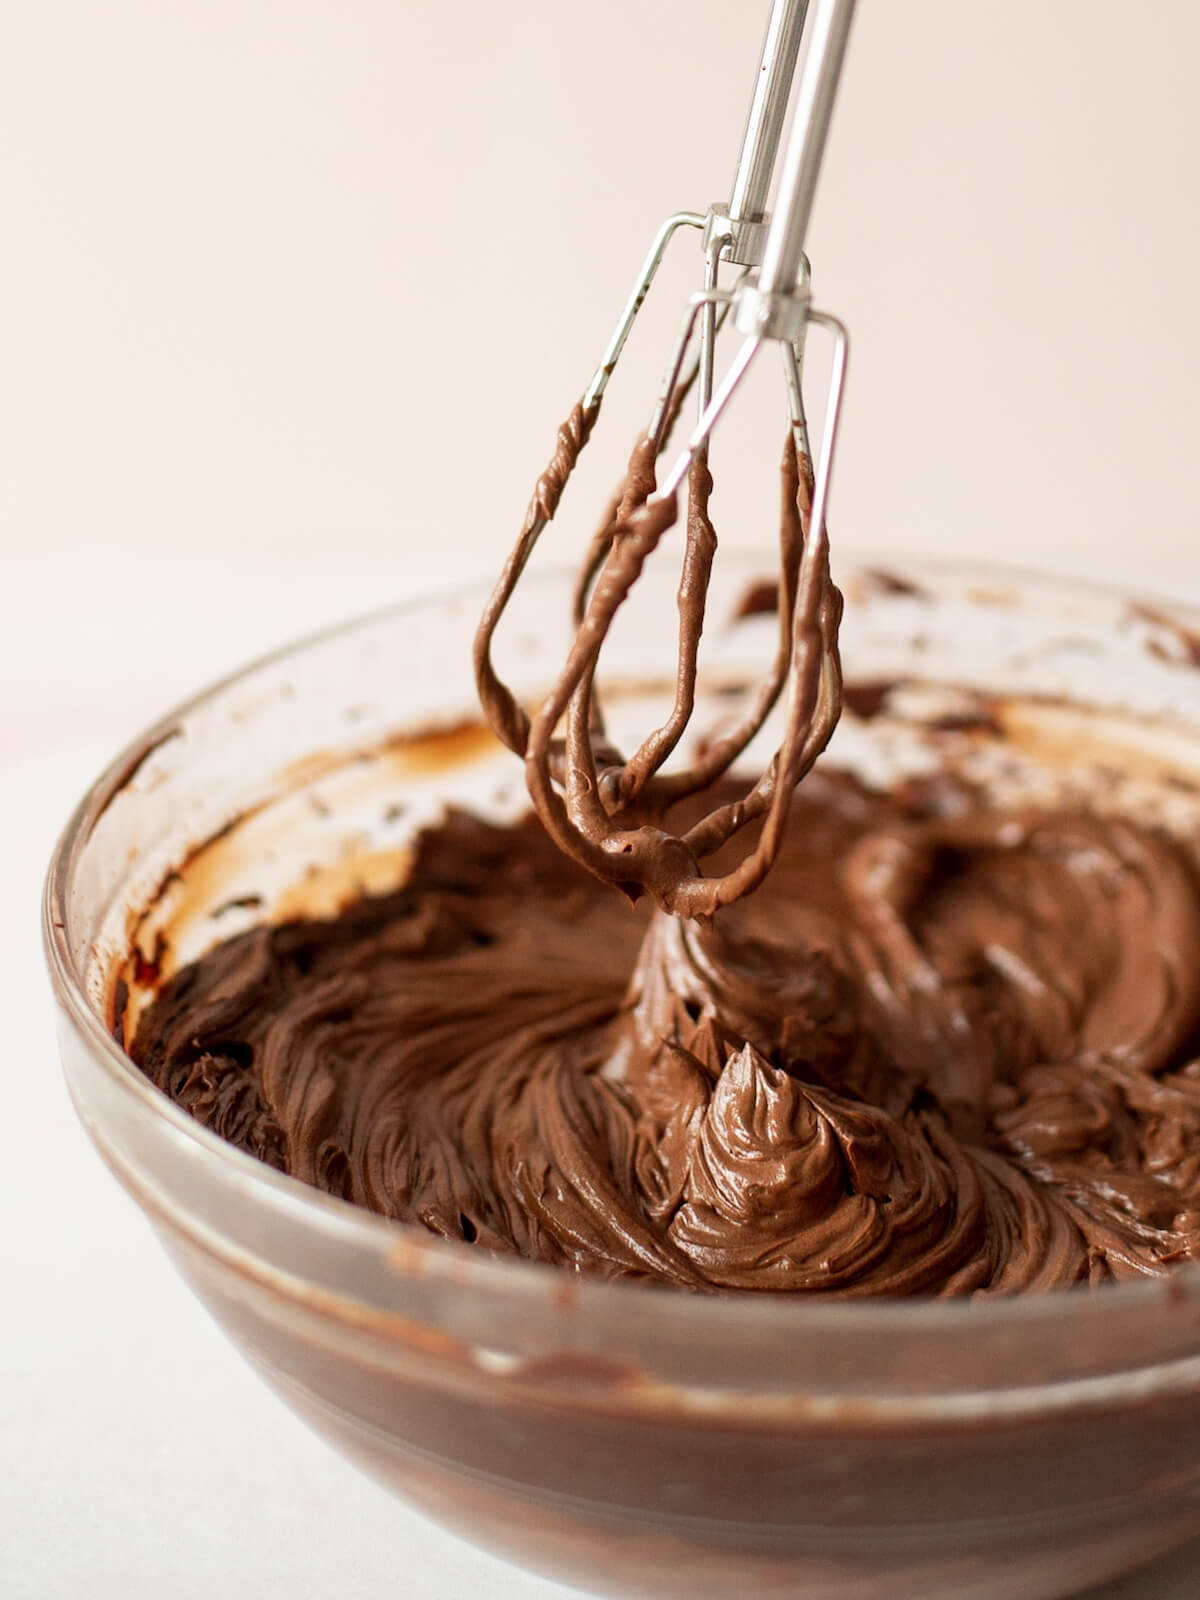 chocolate ganache frosting on mixer beaters